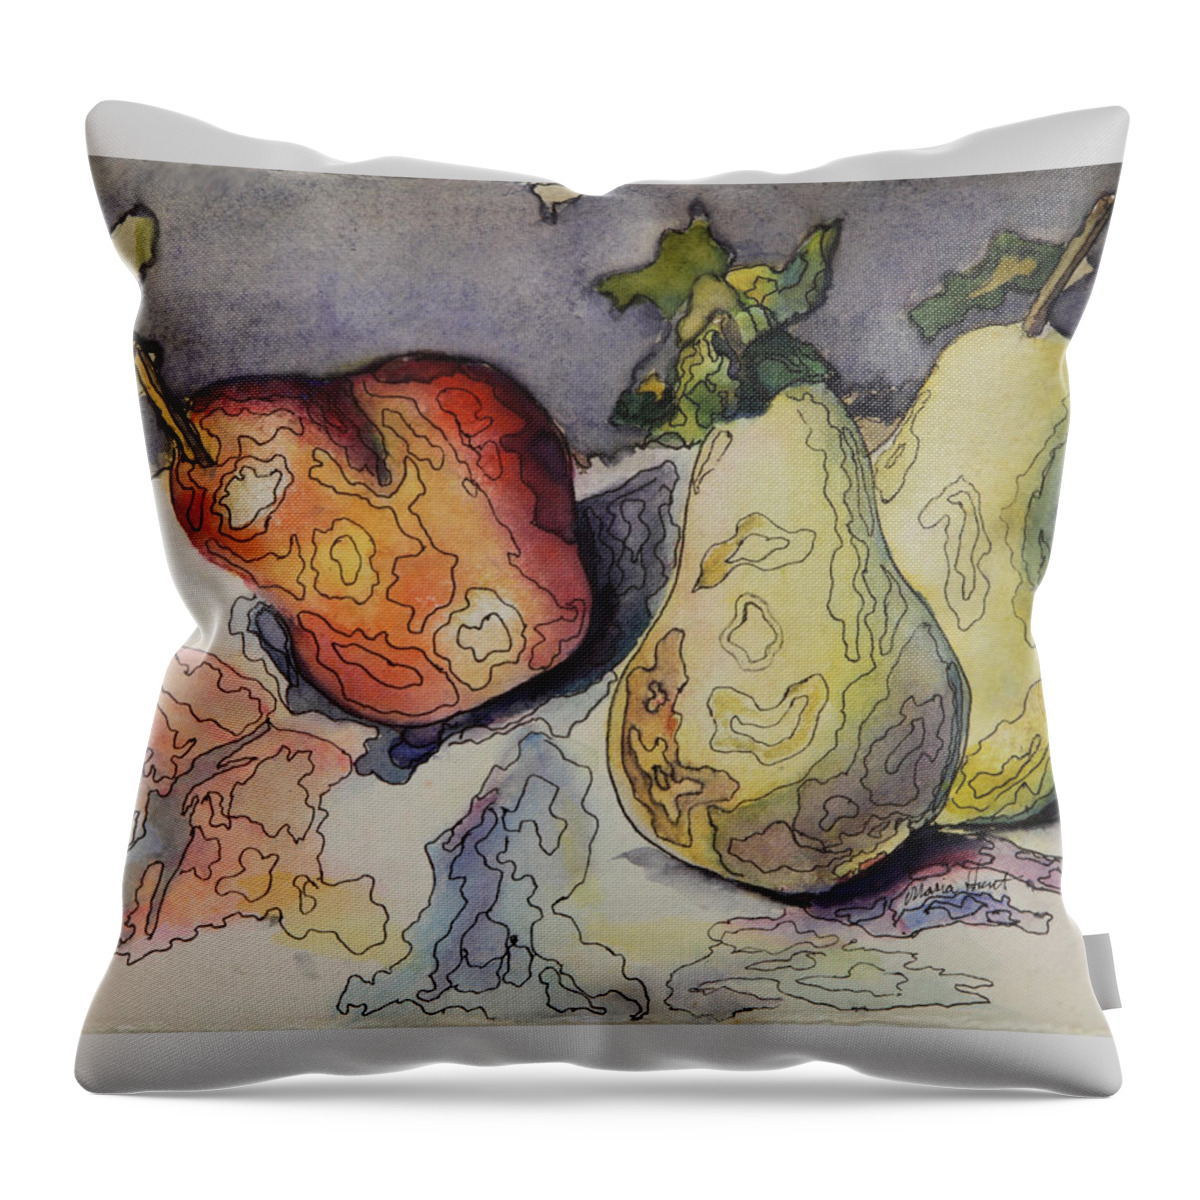 Still Life Throw Pillow featuring the painting Happy Pears Rocking Out by Maria Hunt